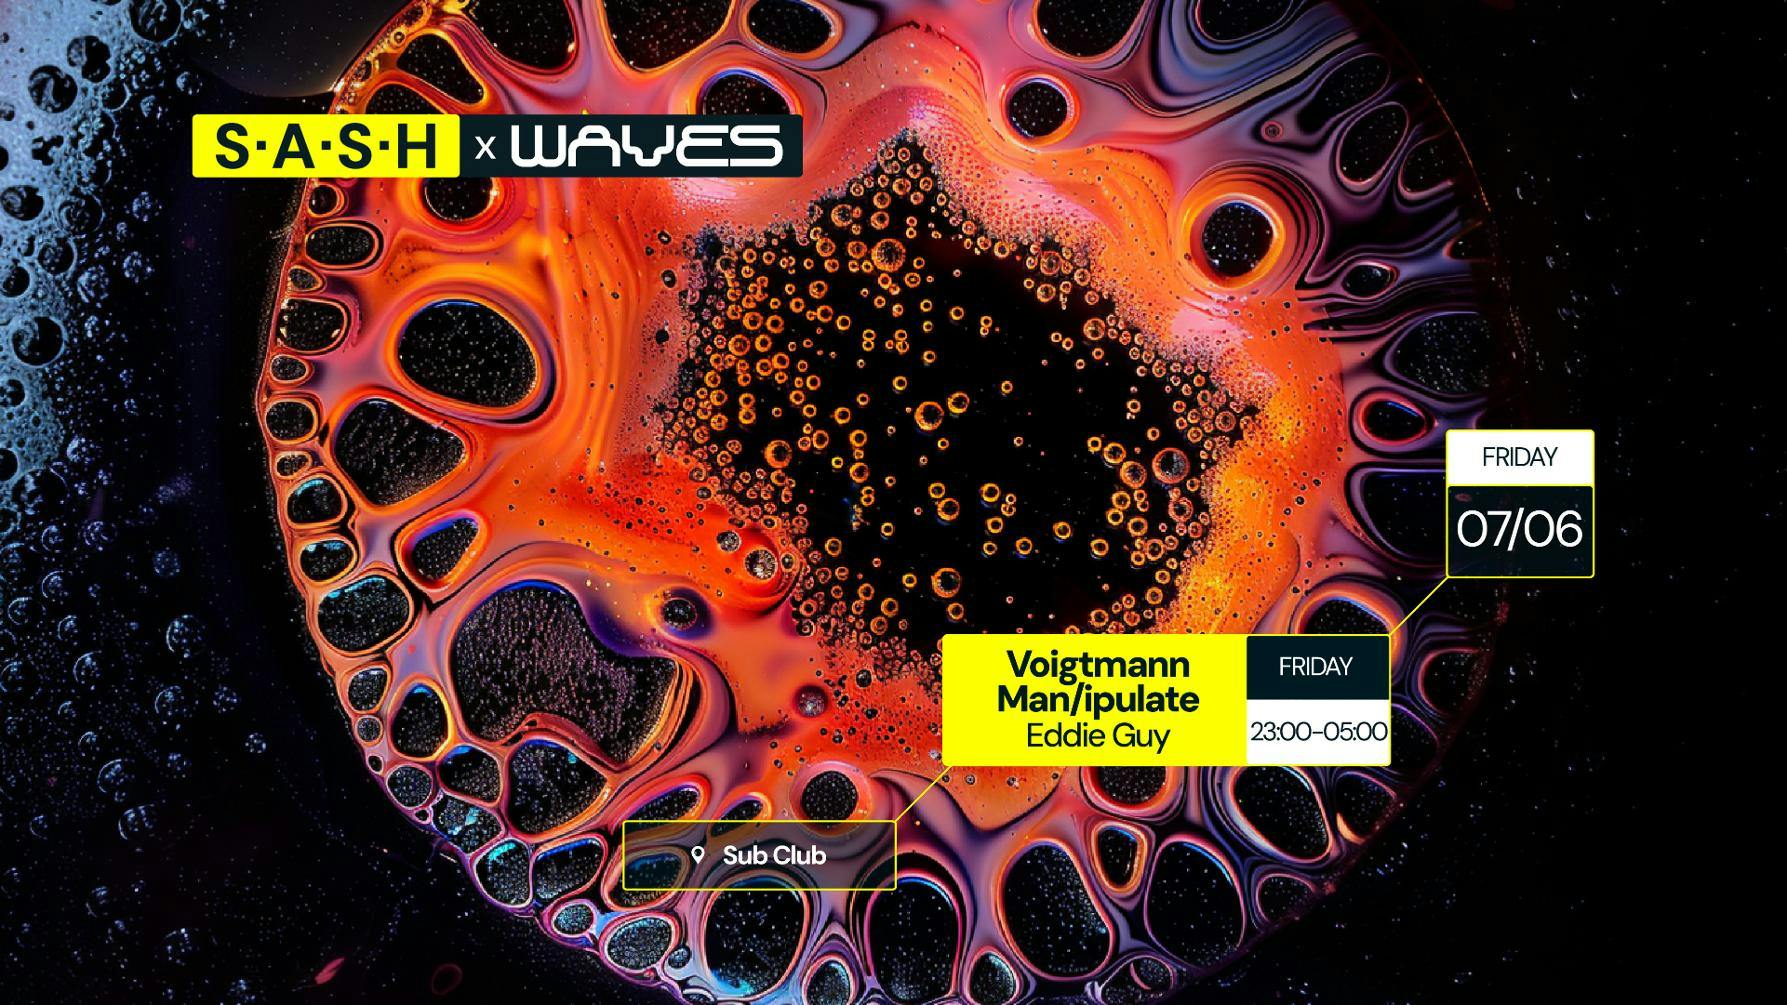 ★ S.A.S.H Melbourne & Waves ★ Voigtmann & Man/ipulate ★ Friday June 7th ★